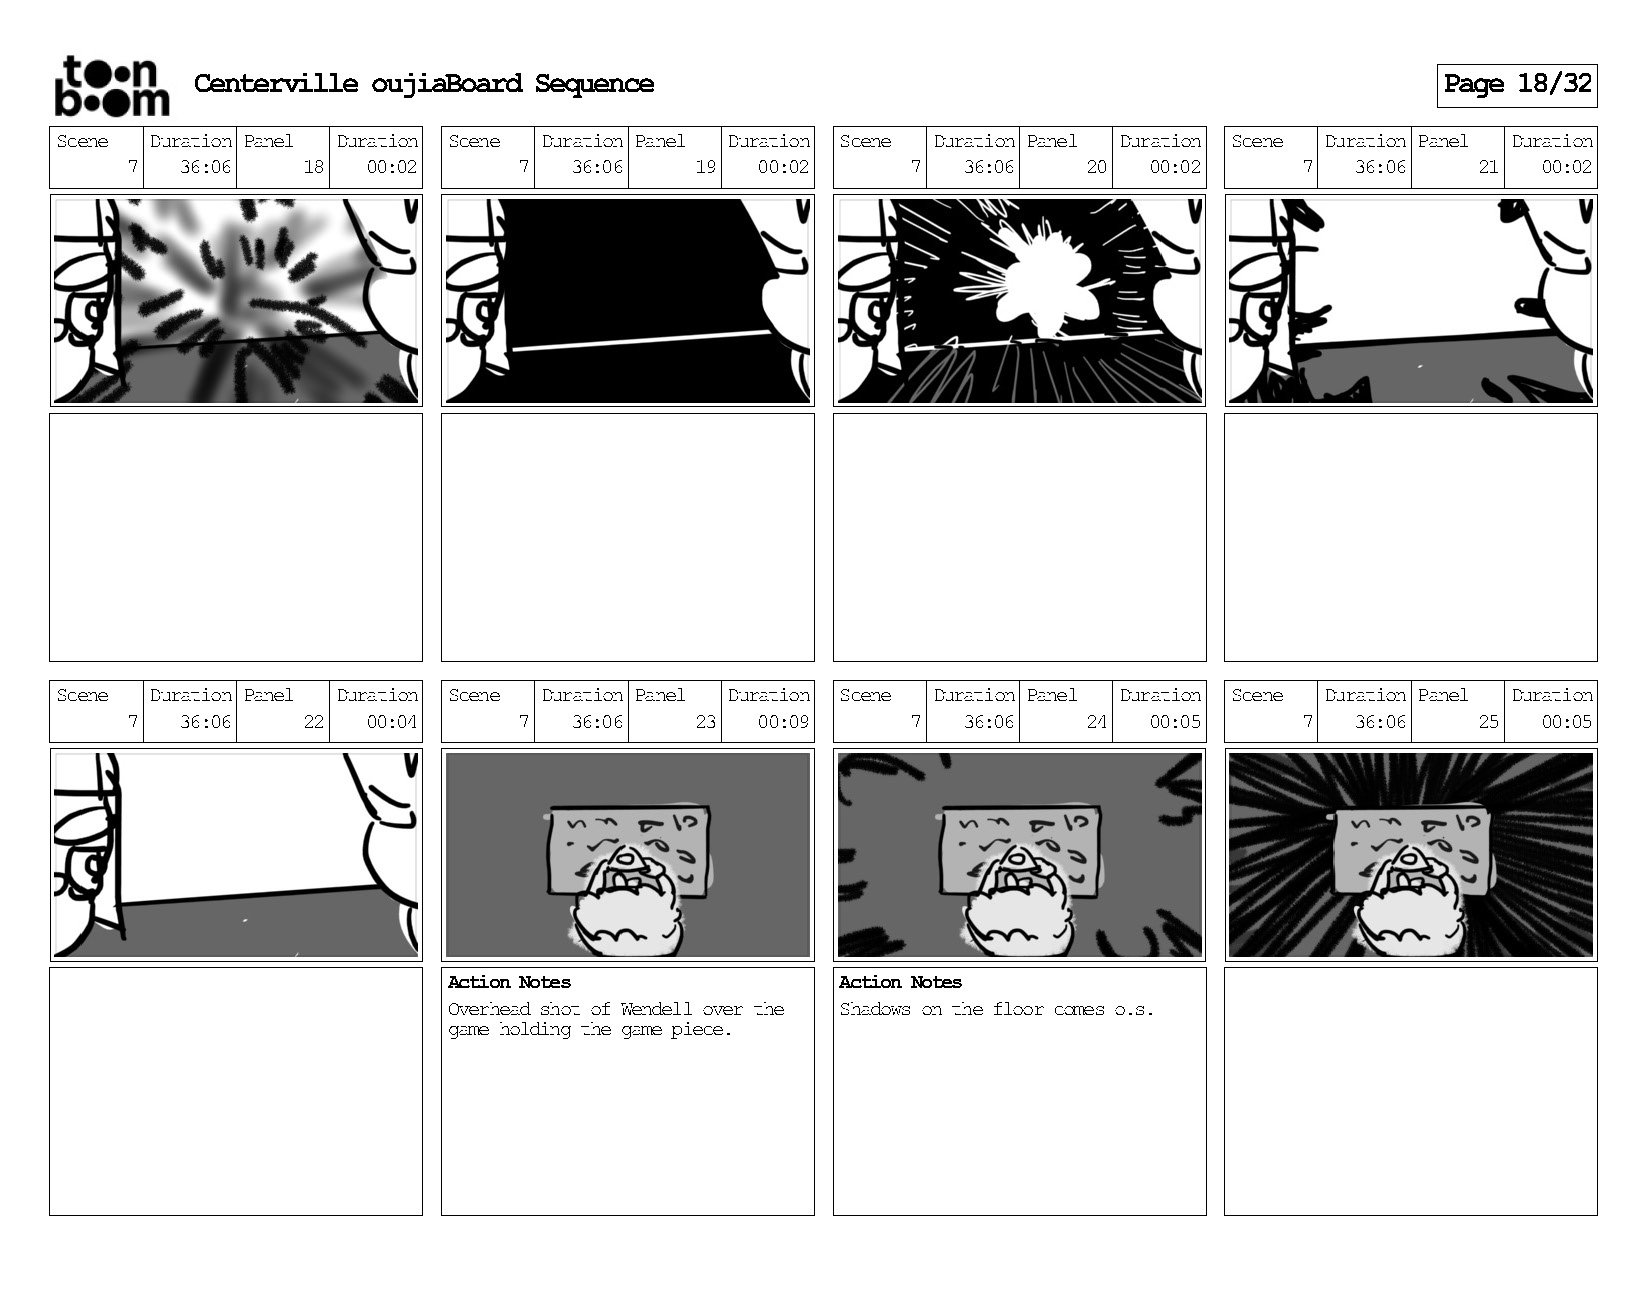 Centerville_oujiaBoard_Sequence_Page_19.jpg